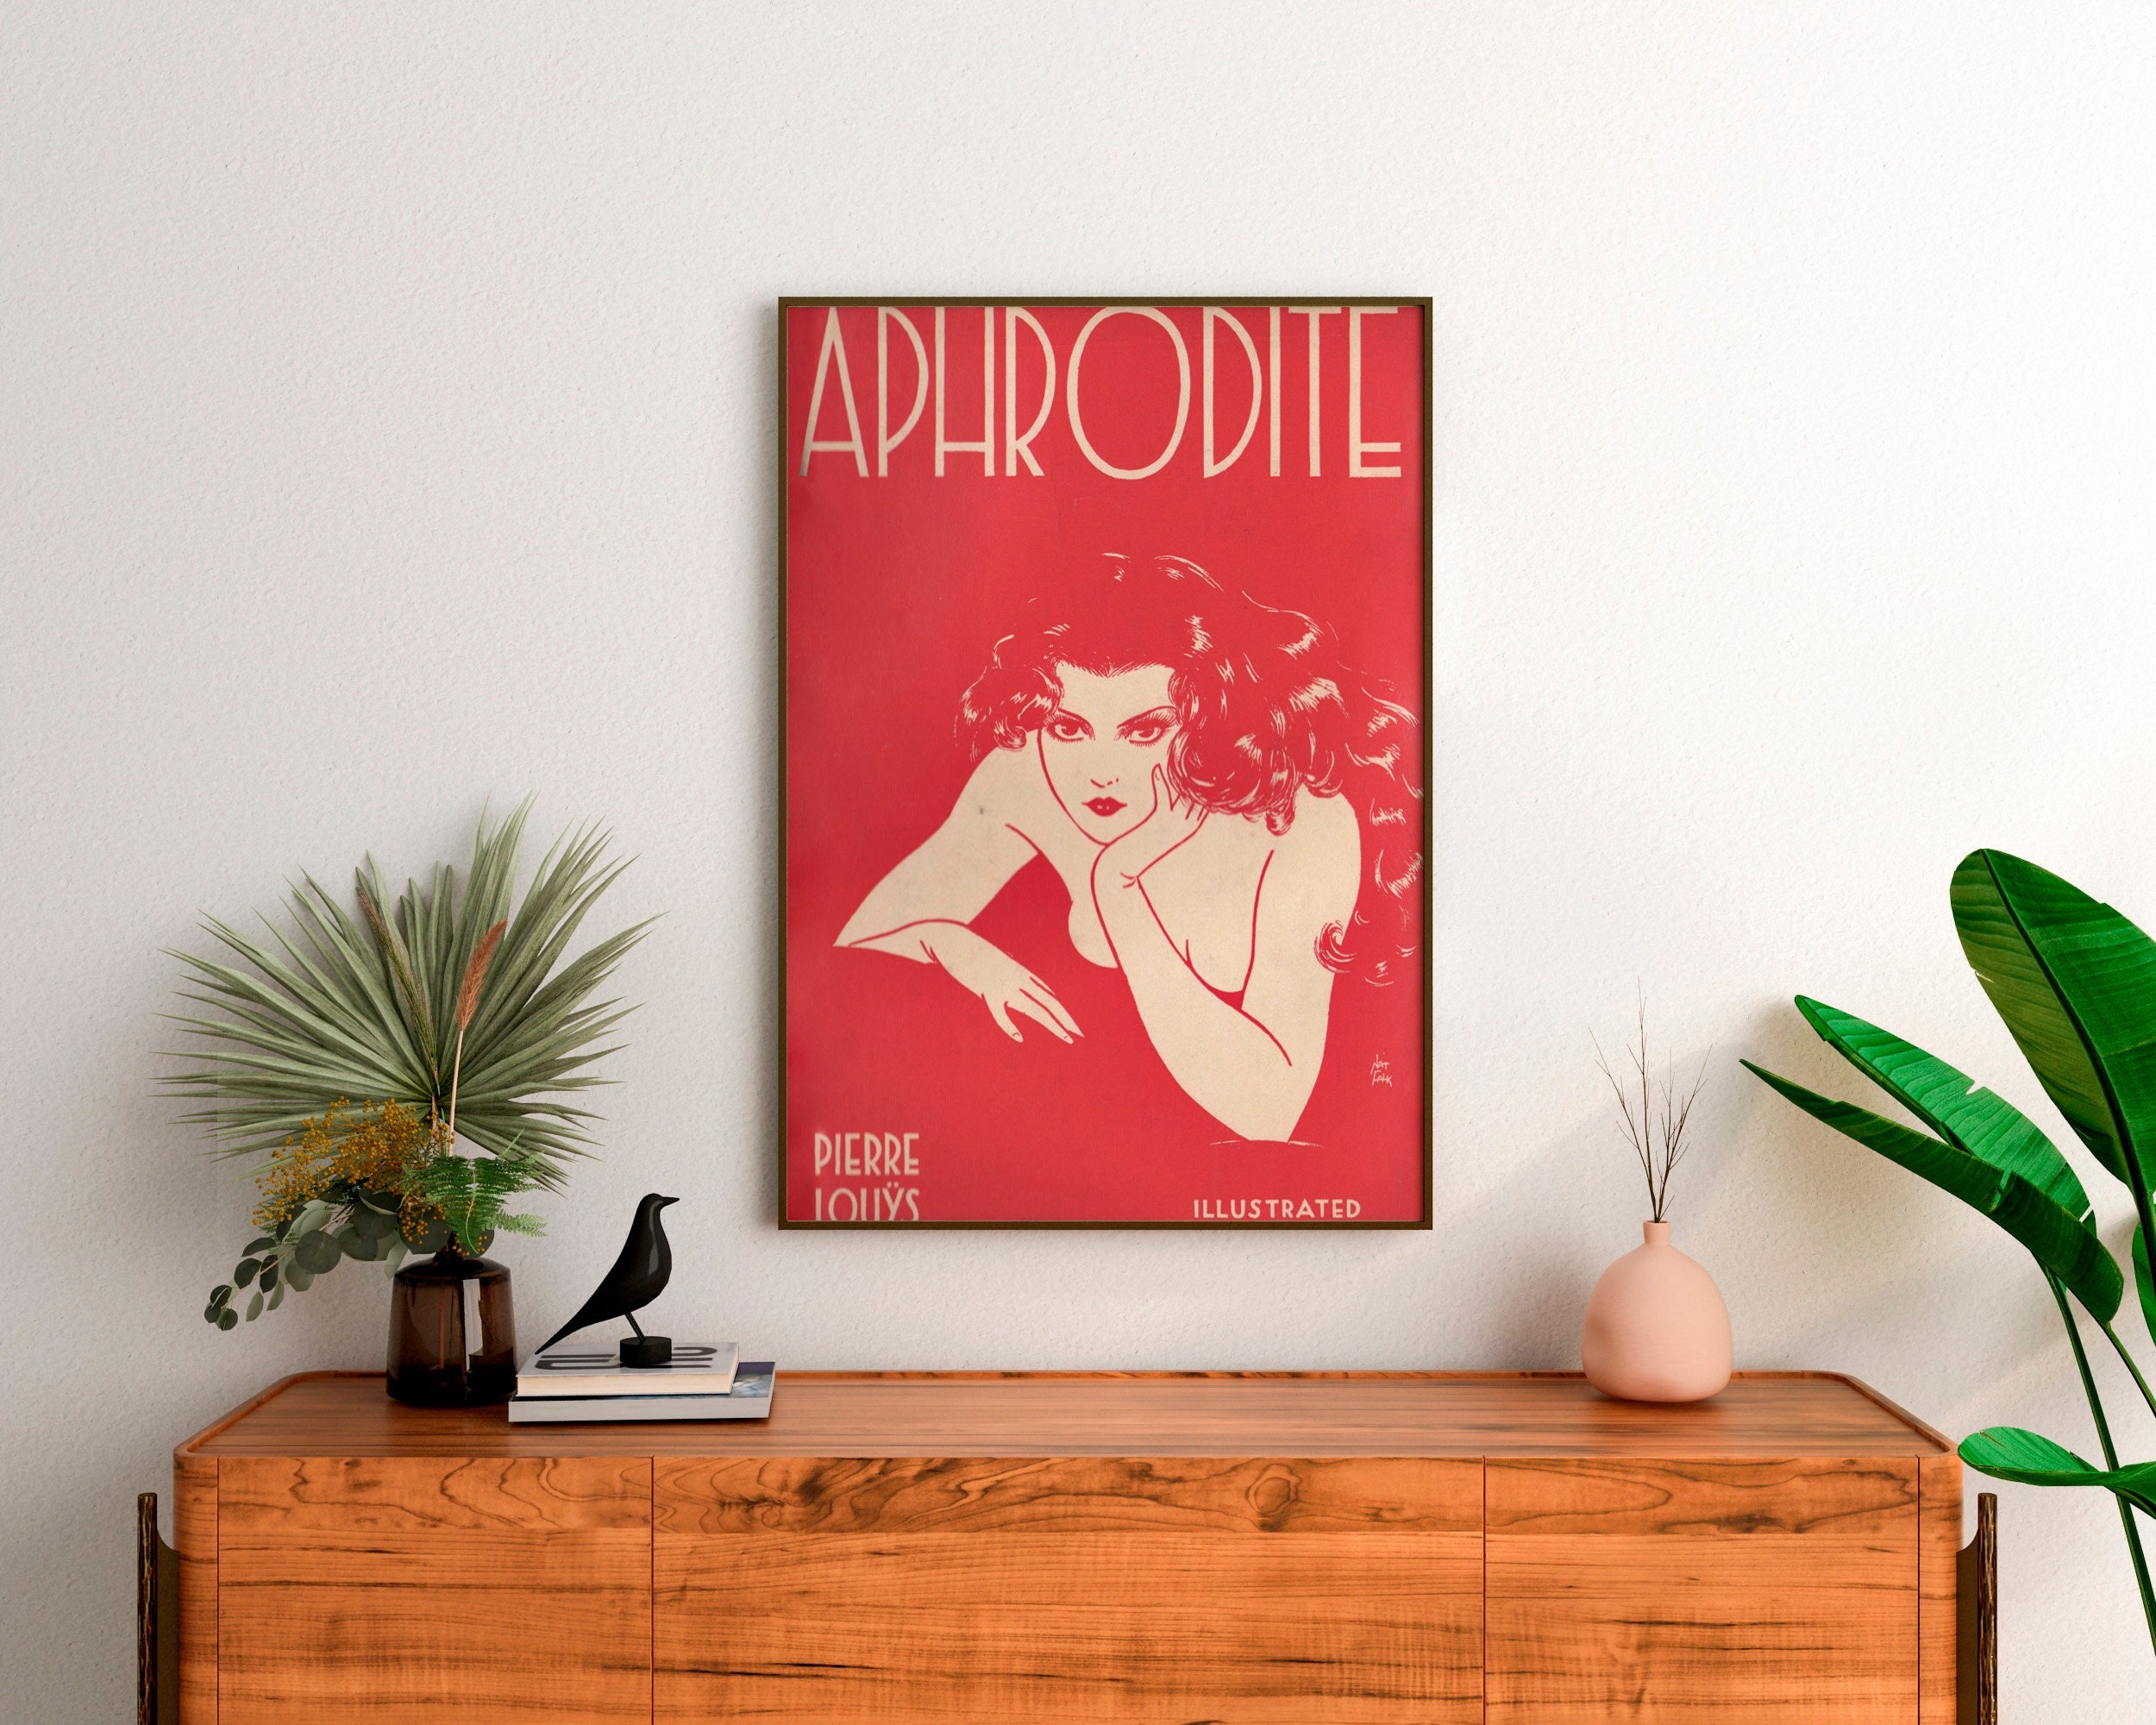 Pierre Louys Aphrodite 1932. Book Cover Art Deco Nouveau. Print on Canvas,  Vintage Style Gift, Giclee Large Wall Art, Sexy Woman Poster 